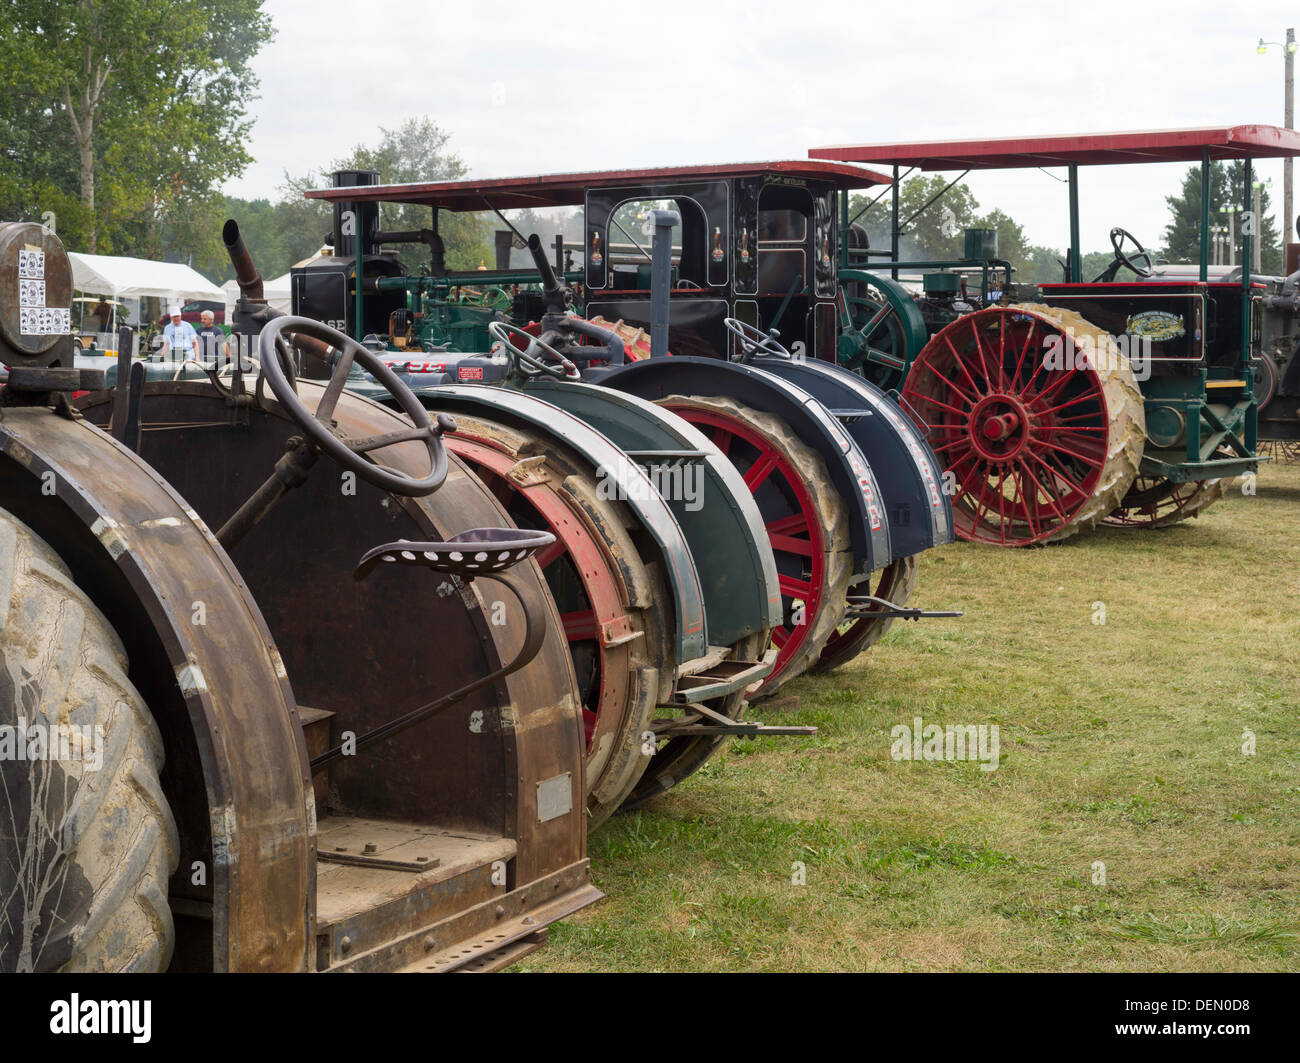 Rear view of antique J.I. Case steam tractors; Rock River Thresheree, Edgerton, WI; 2 Sept 2013 Stock Photo